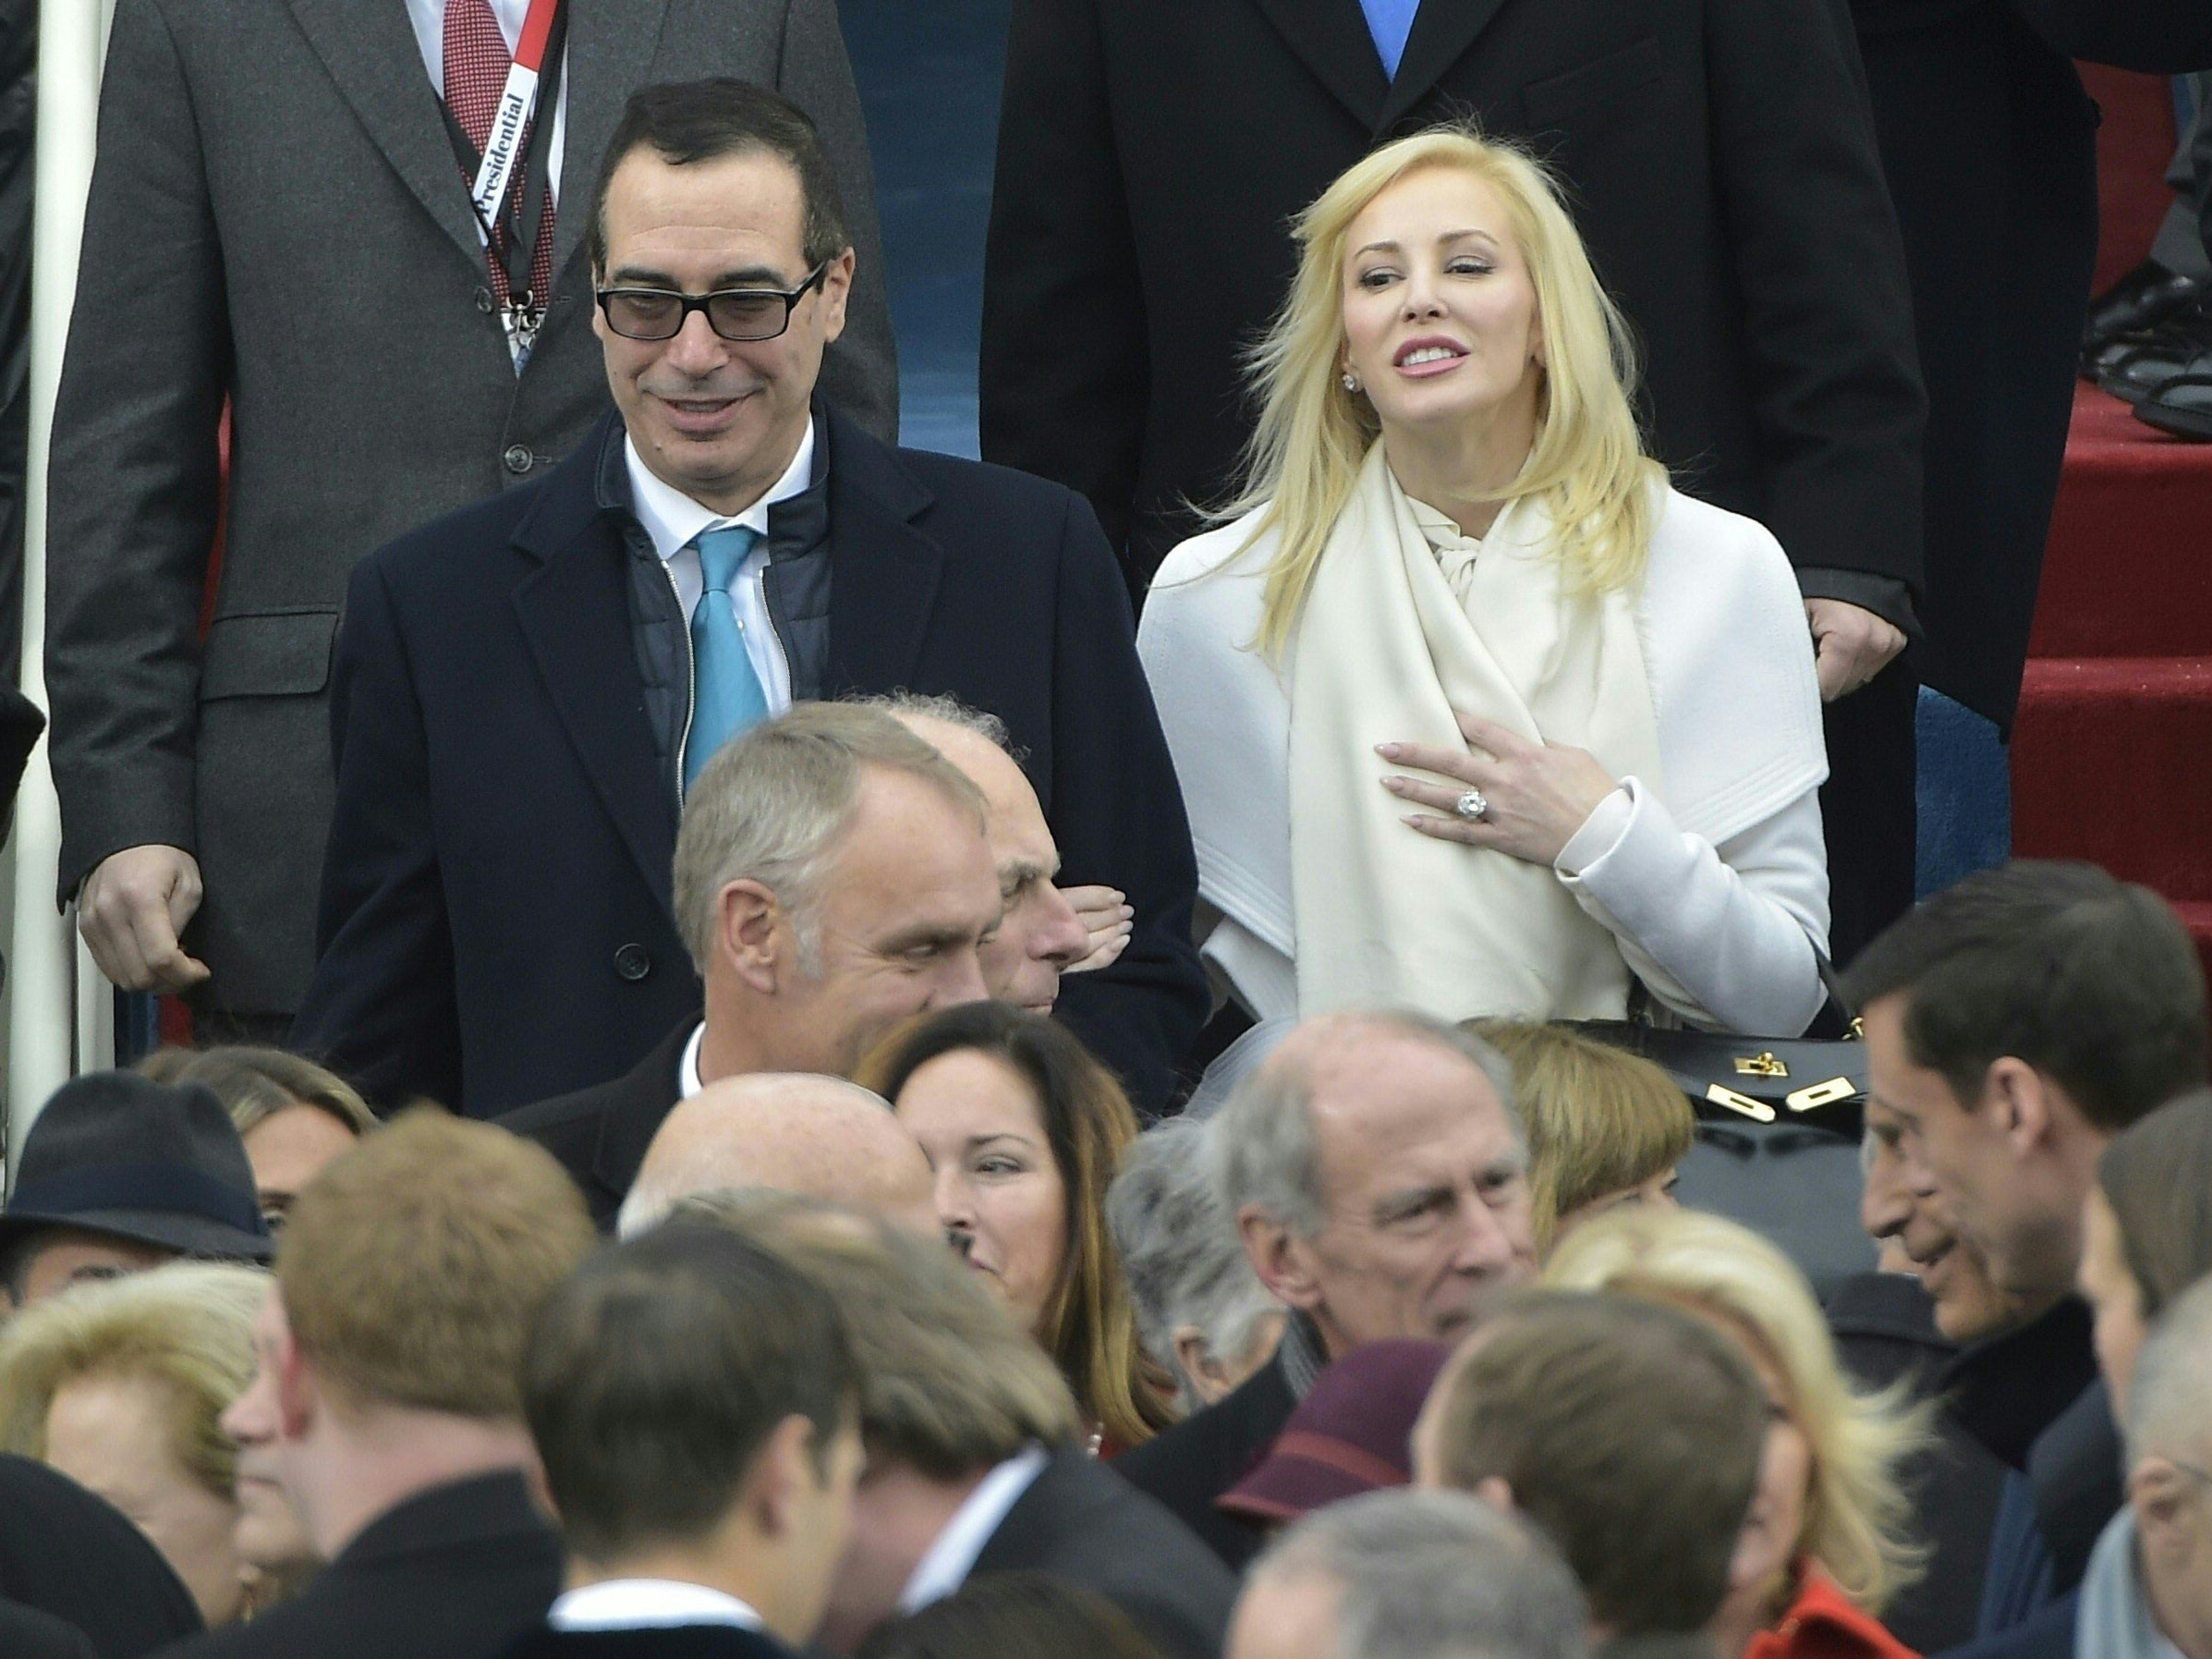 Mr Mnuchin, who has amassed a personal fortune of hundreds of millions of dollars, married Scottish actress Louise Linton in June